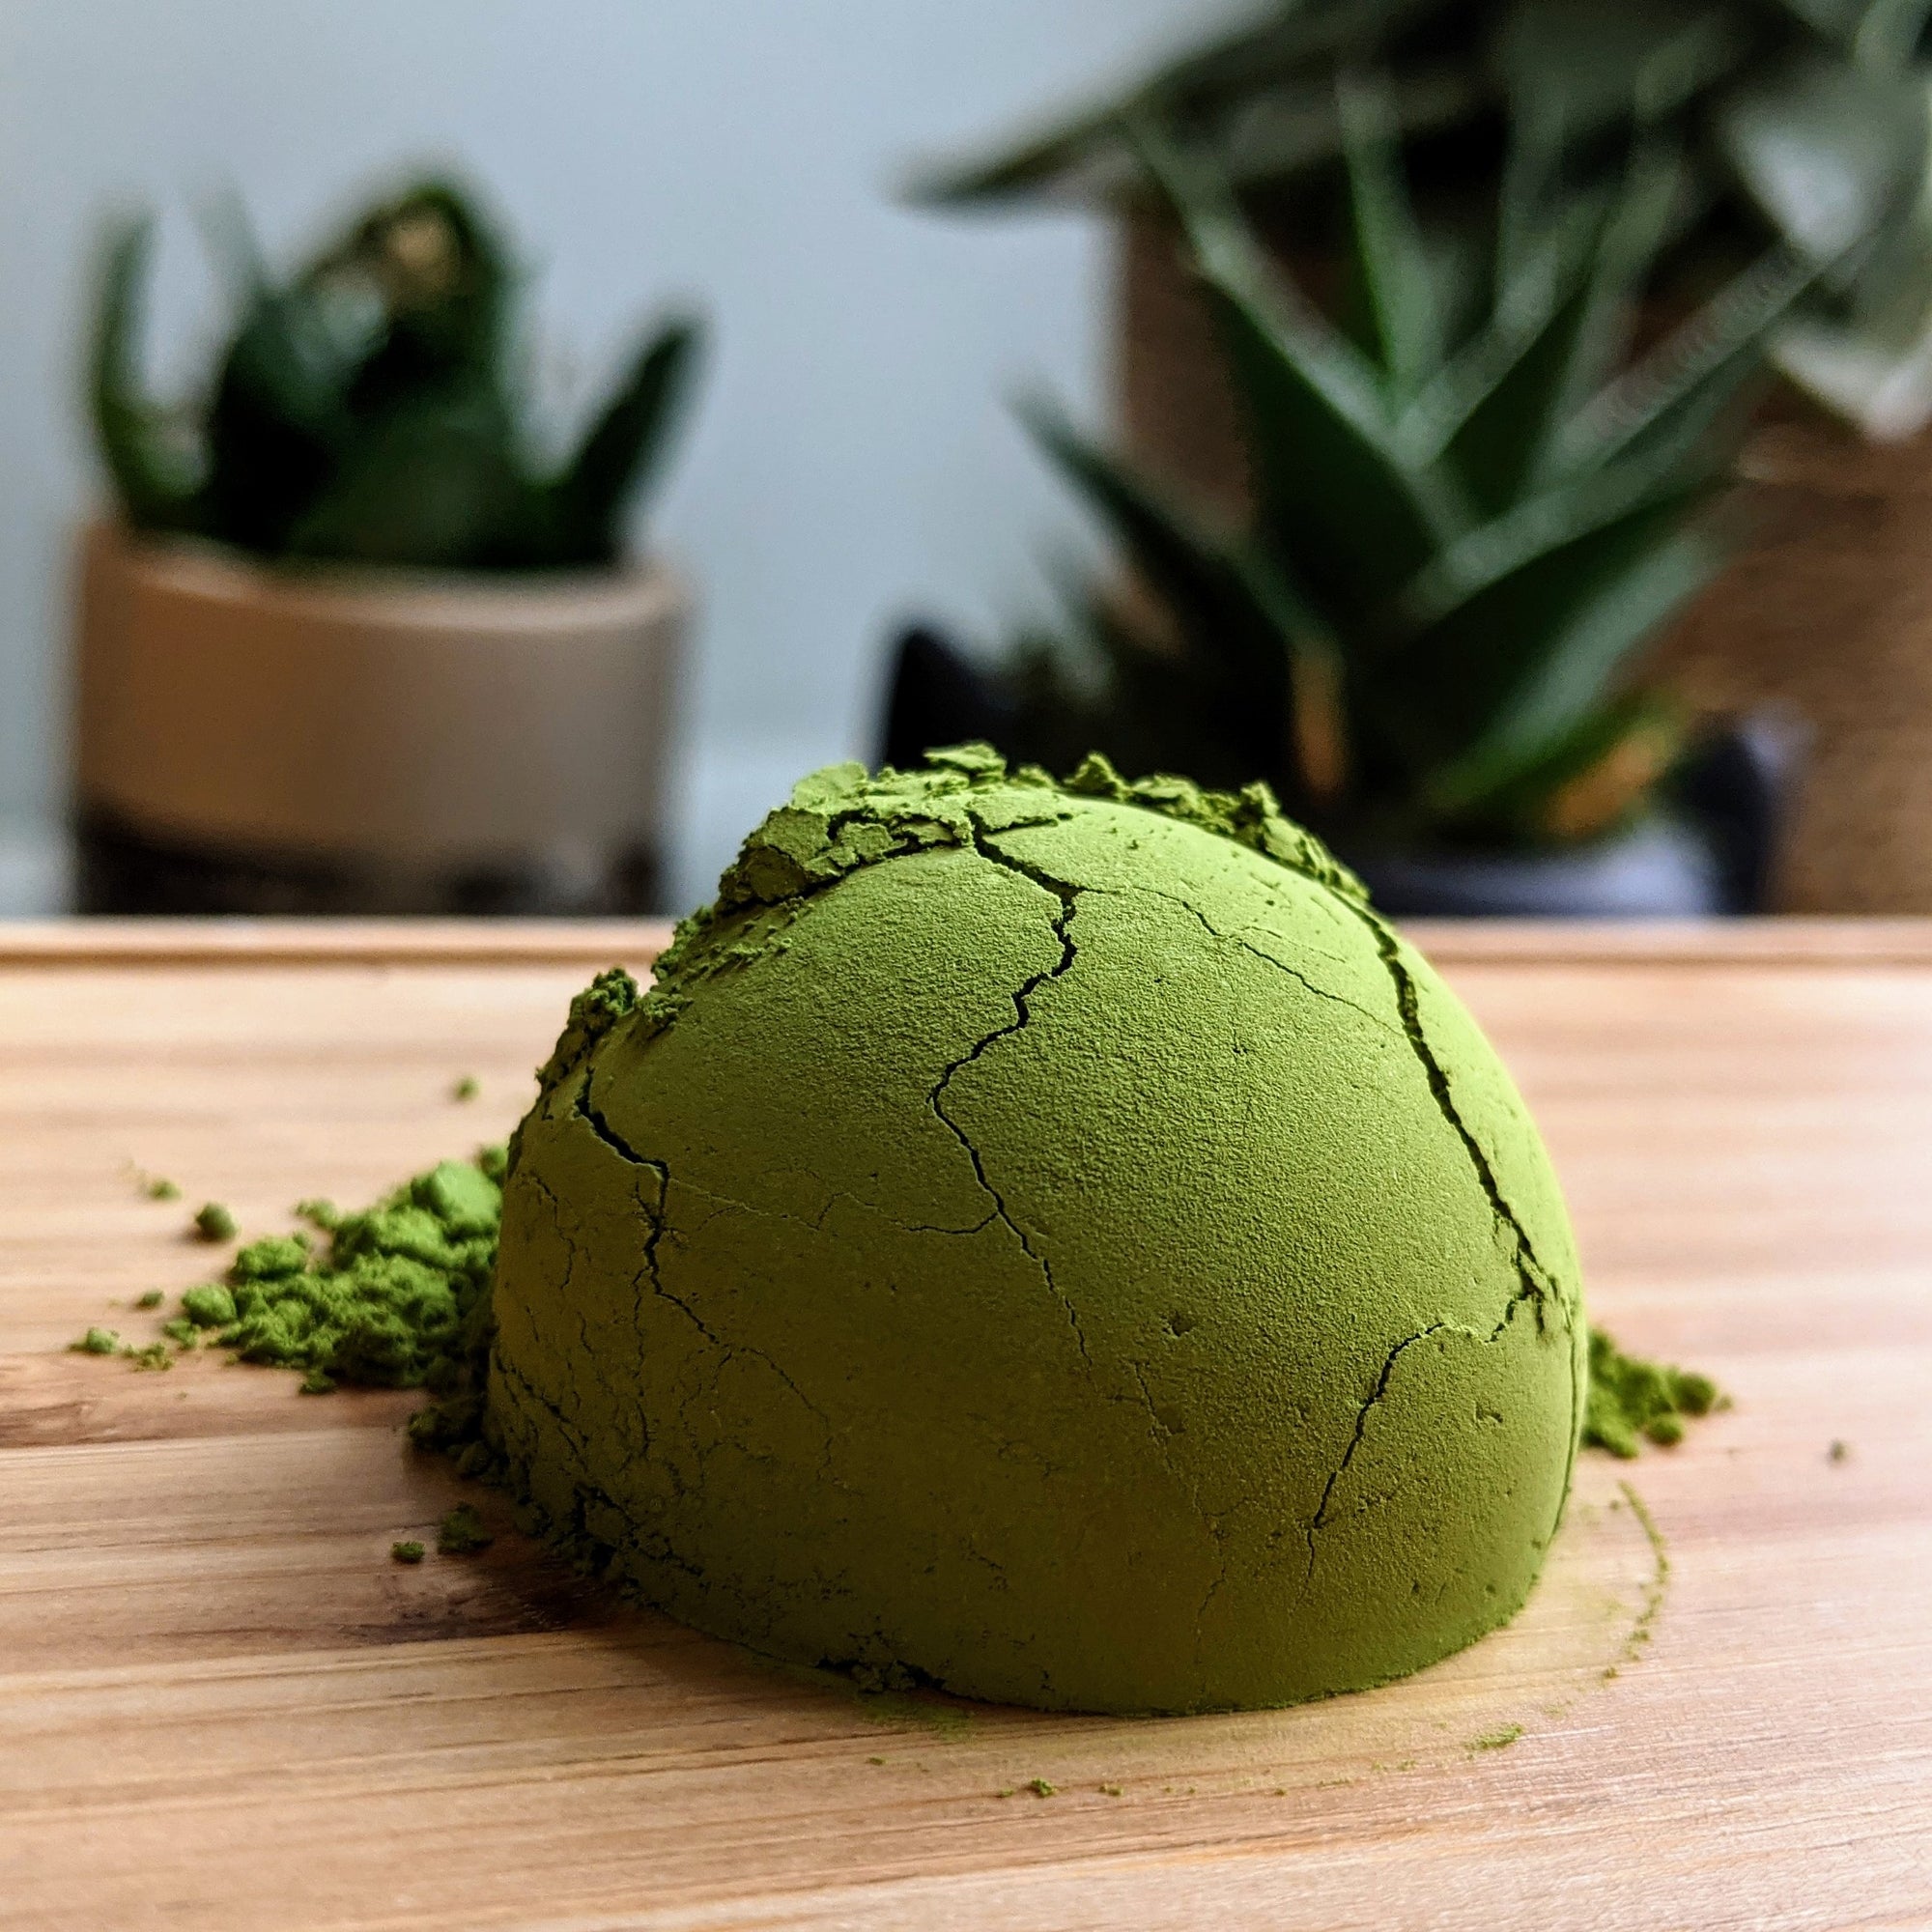 What's matcha made of?